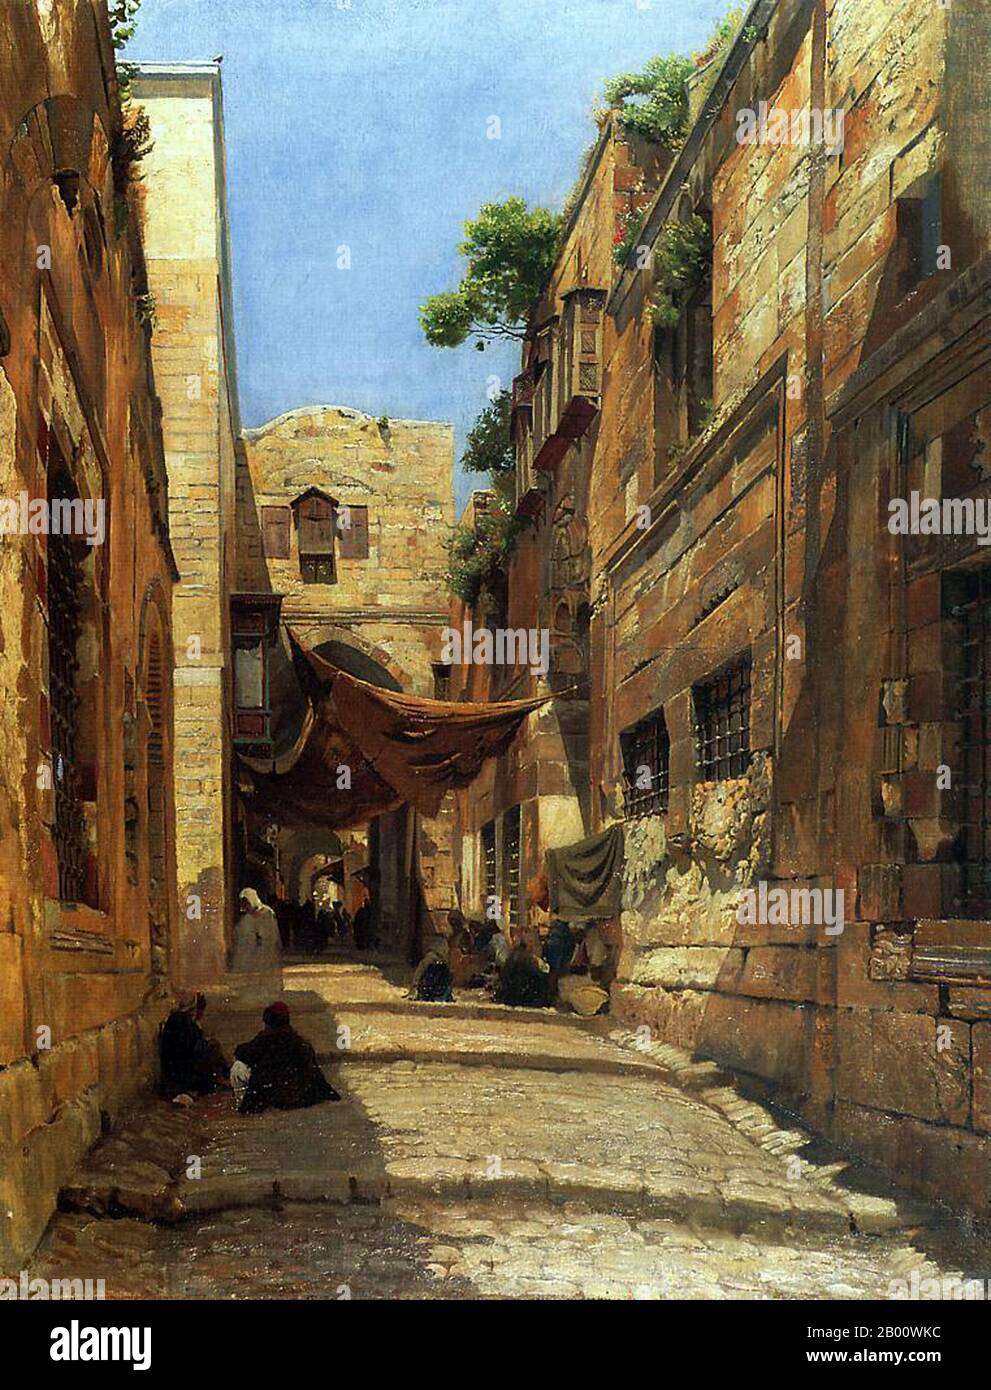 Palestine: 'David Street, Jerusalem'. Oil on canvas painting by Gustav Bauernfeind (1848-1904), 1887.  Gustav Bauernfeind (1848-1904) was a German Orientalist painter. After his first visit to Jaffa and Jerusalem in 1880-81, he traveled widely in the Middle East, particularly to the Holy Land and Damascus, eventually settling in Jerusalem where he died in 1904. Stock Photo